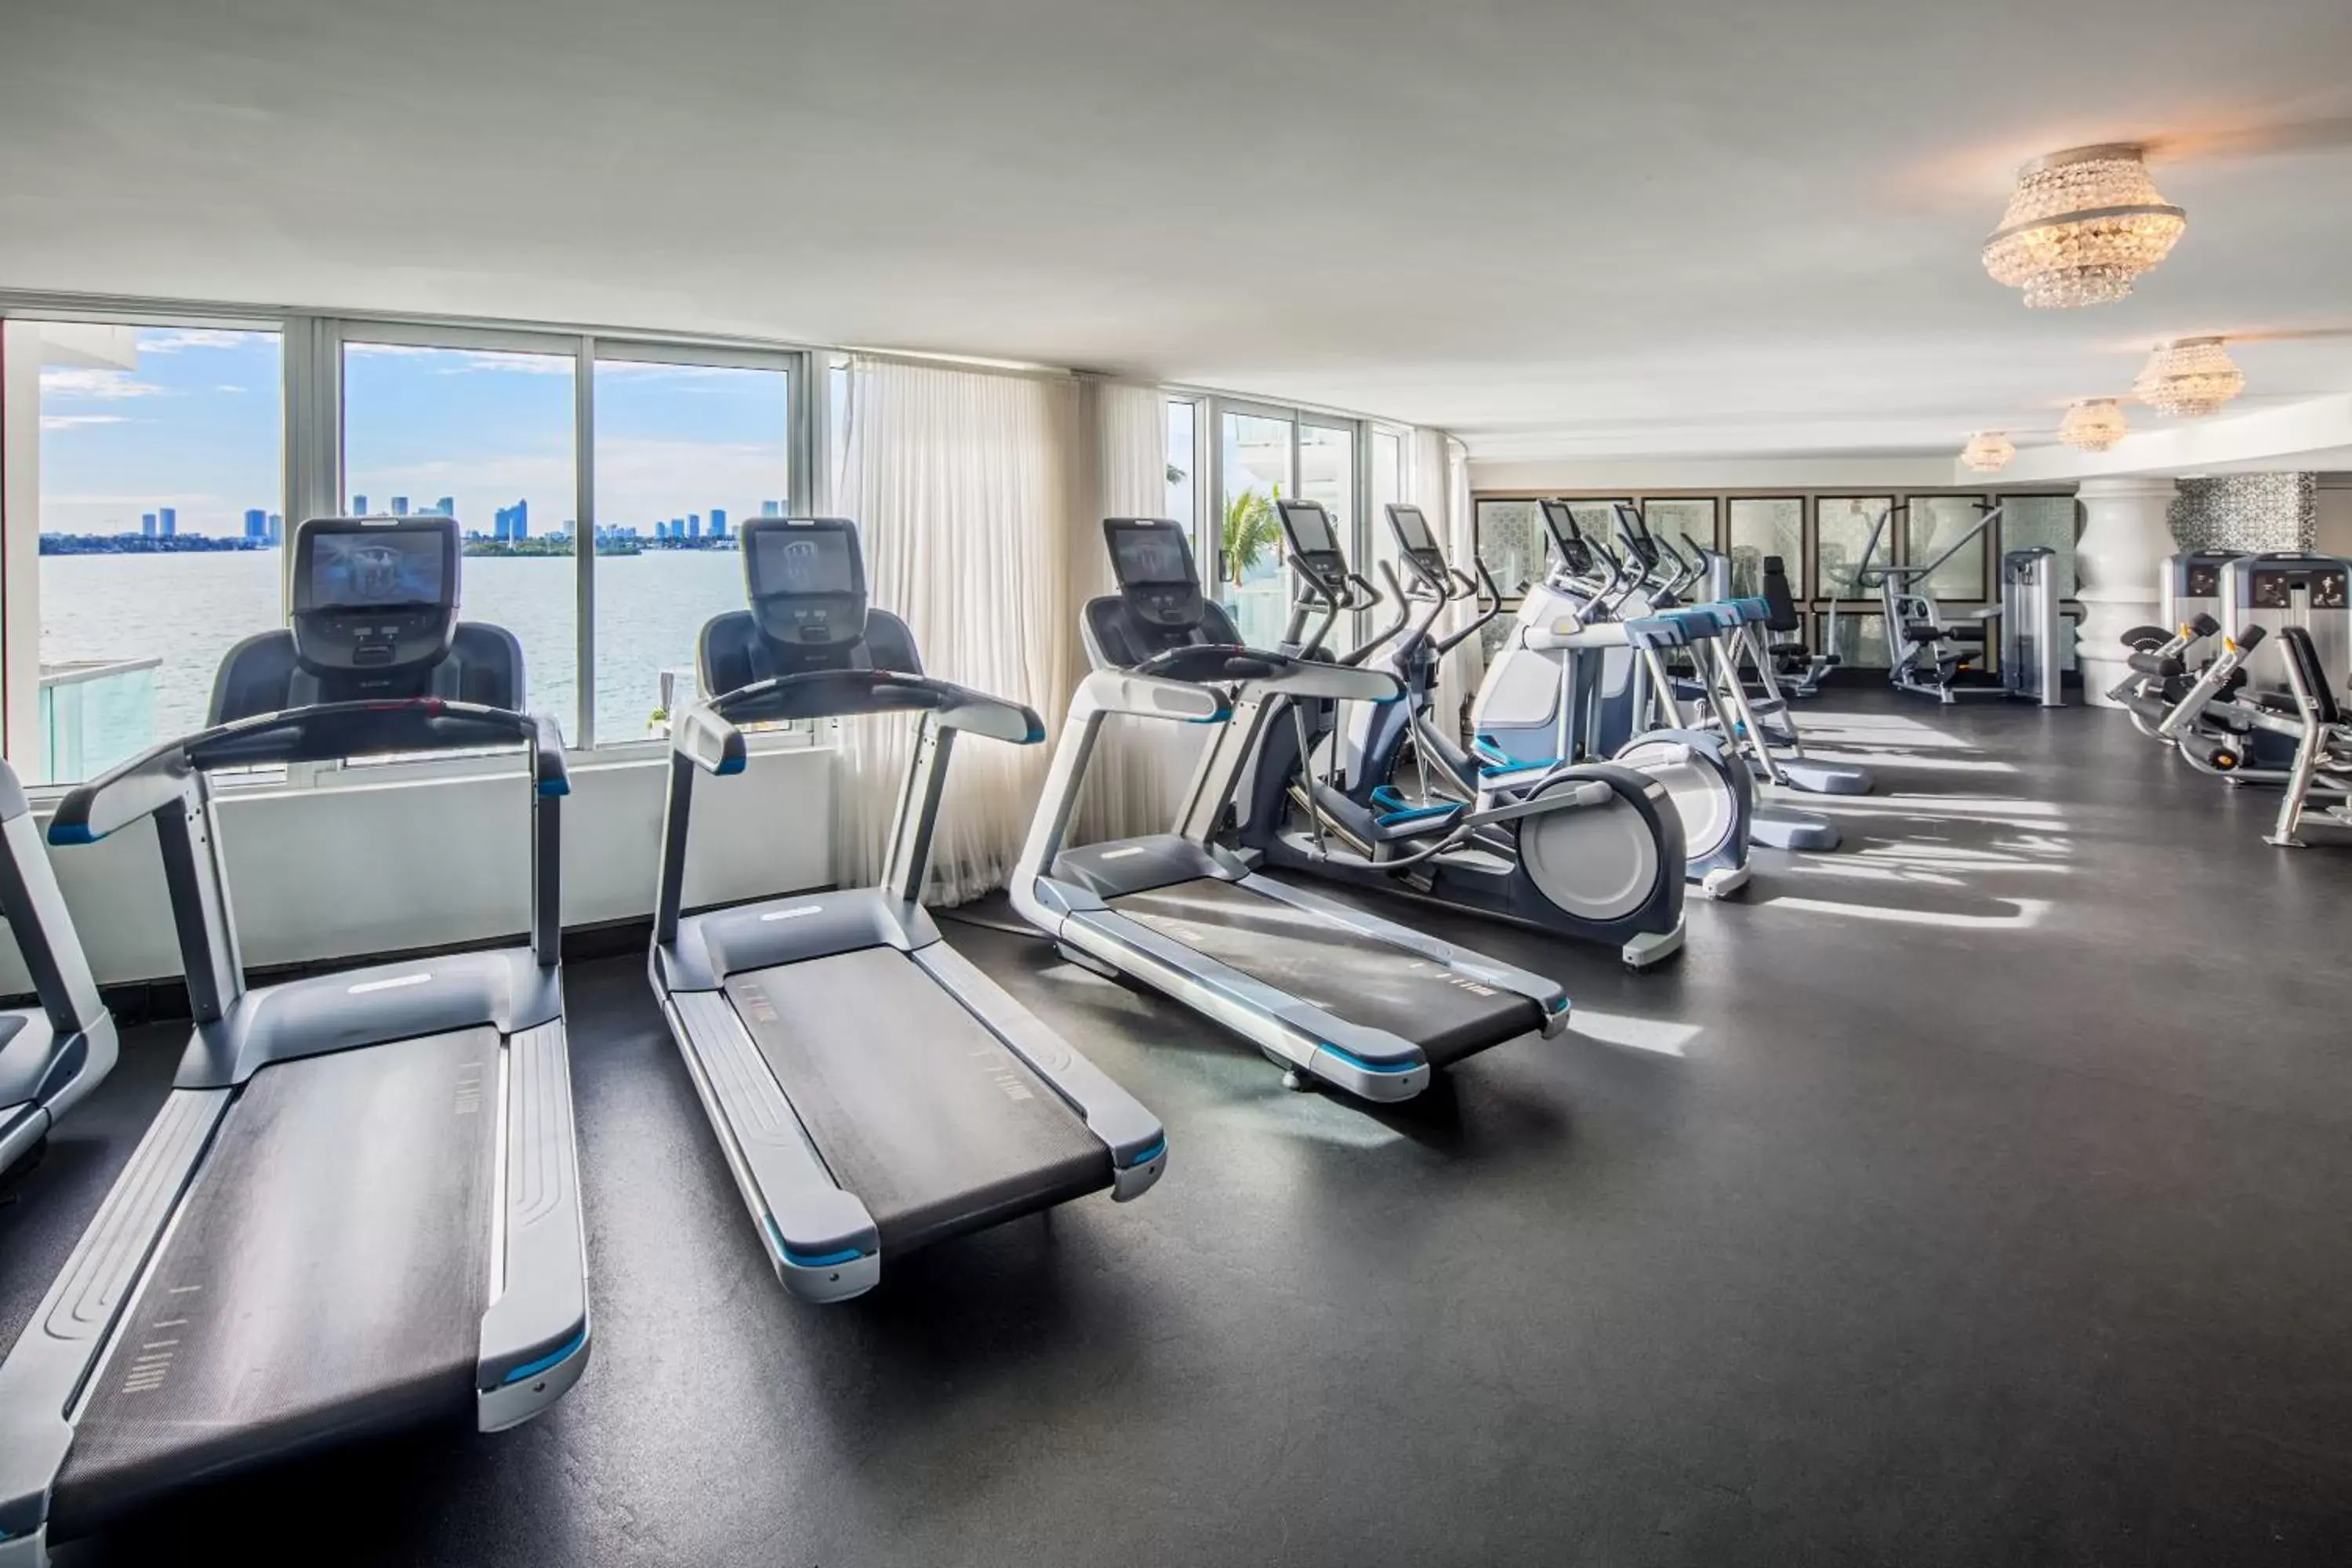 Fitness centre/facilities, Fitness Center/Facilities in Mondrian South Beach